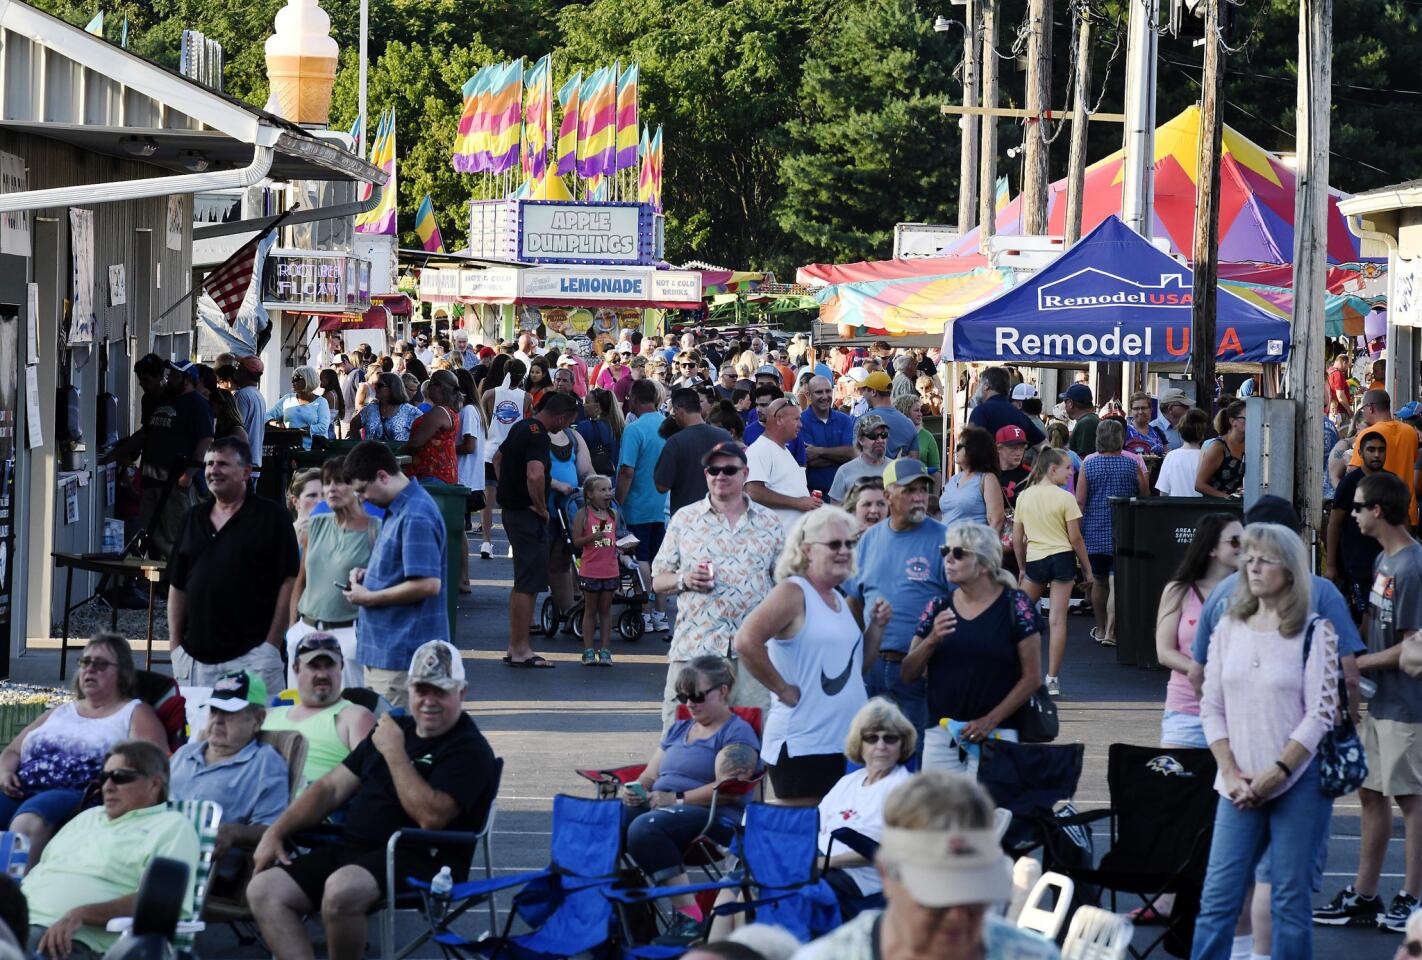 Carnival-goers begin to fill the midway of the Winfield fire company carnival Wednesday, July 10, 2019.